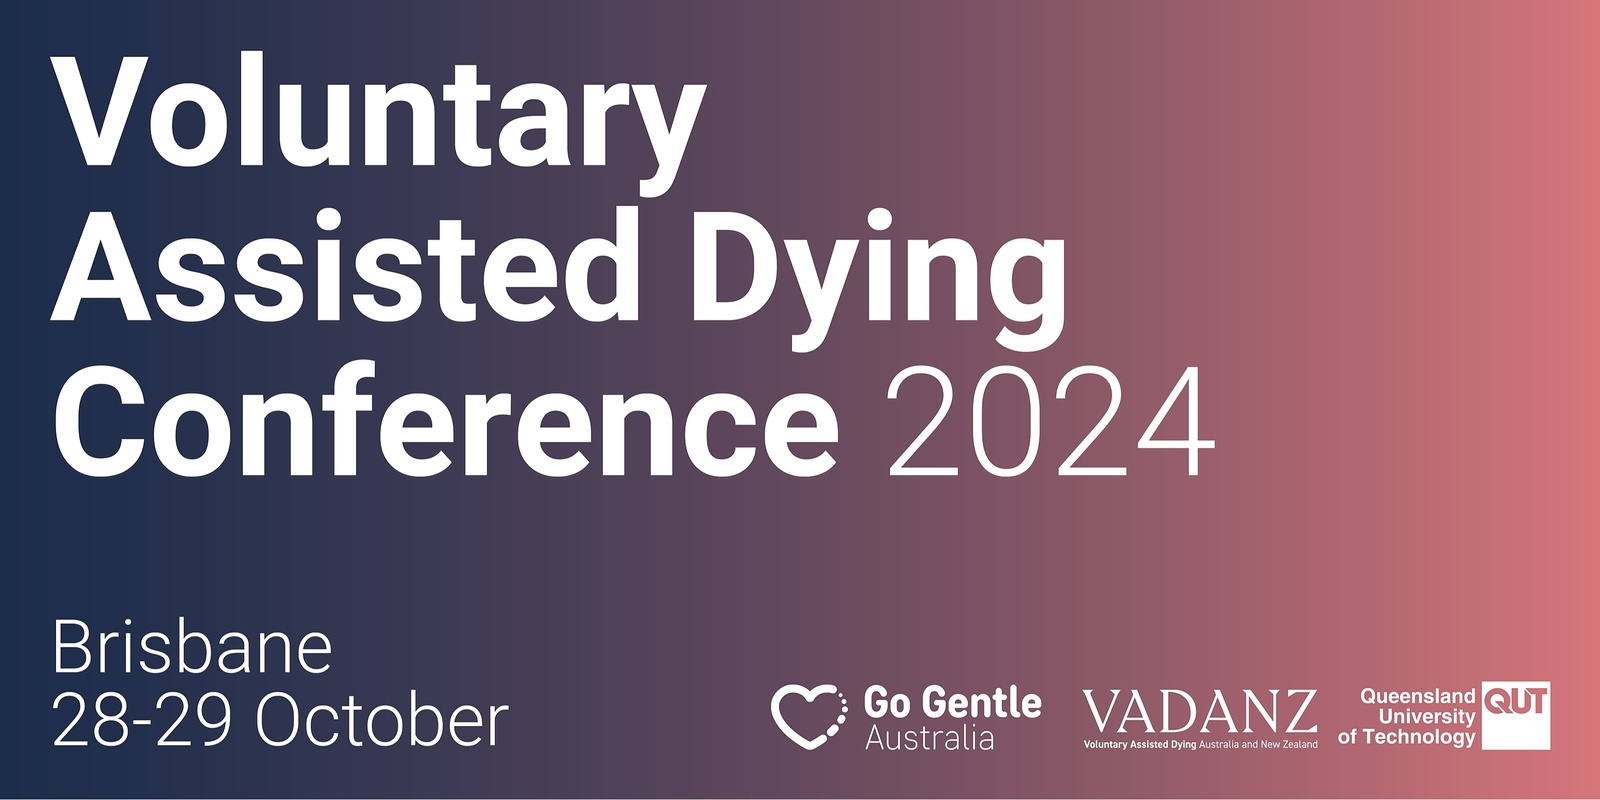 Banner image for Trans-Tasman Voluntary Assisted Dying Conference 2024